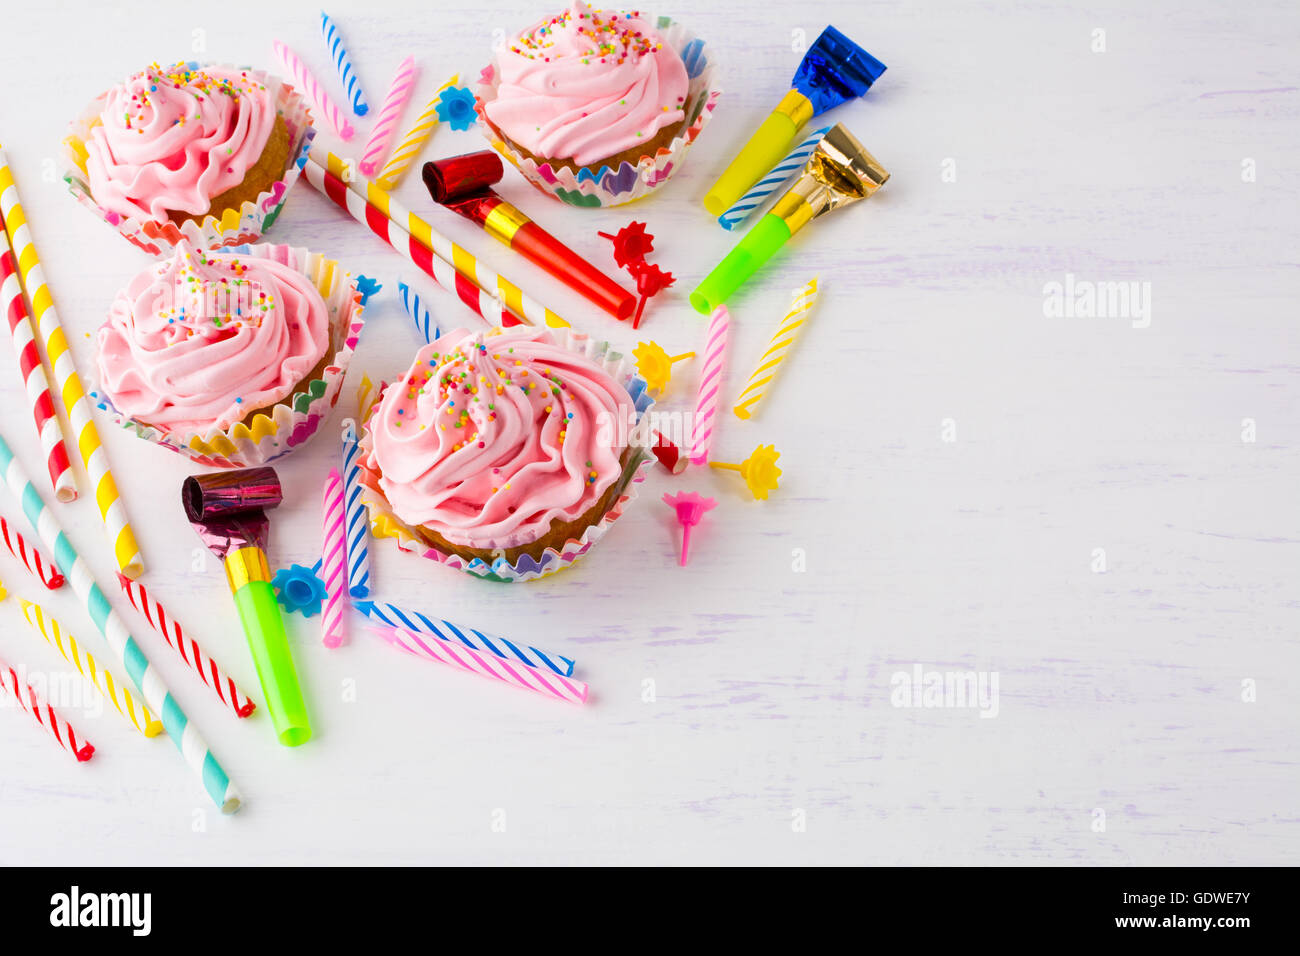 Birthday background with pink cupcakes and birthday candles. Homemade cupcakes with whipped cream. Holiday party background. Stock Photo